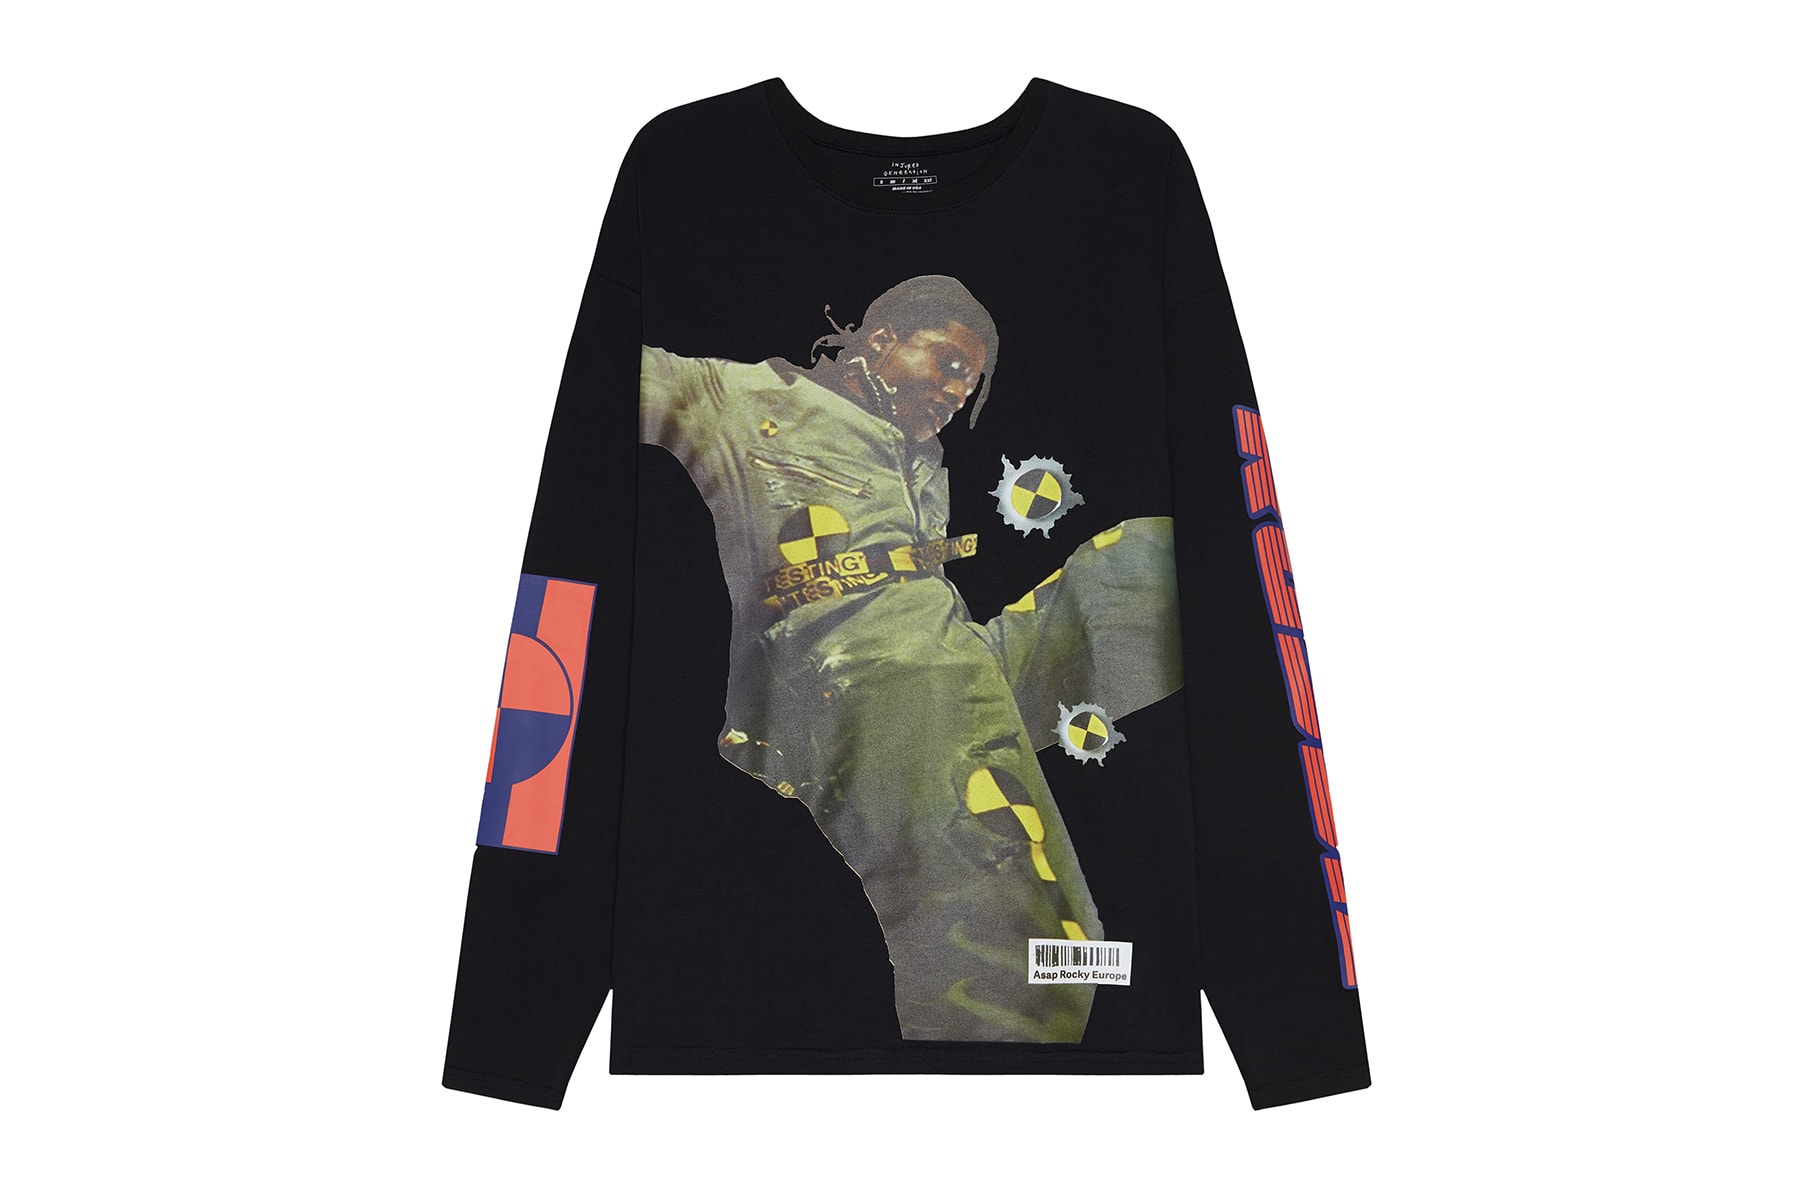 A$AP Rocky Limited Edition Russia Tour Merchandise SVMOSCOW Babushka Boi AWGE designed prints t-shirts long sleeves shorts hat drop date release info price pictures 